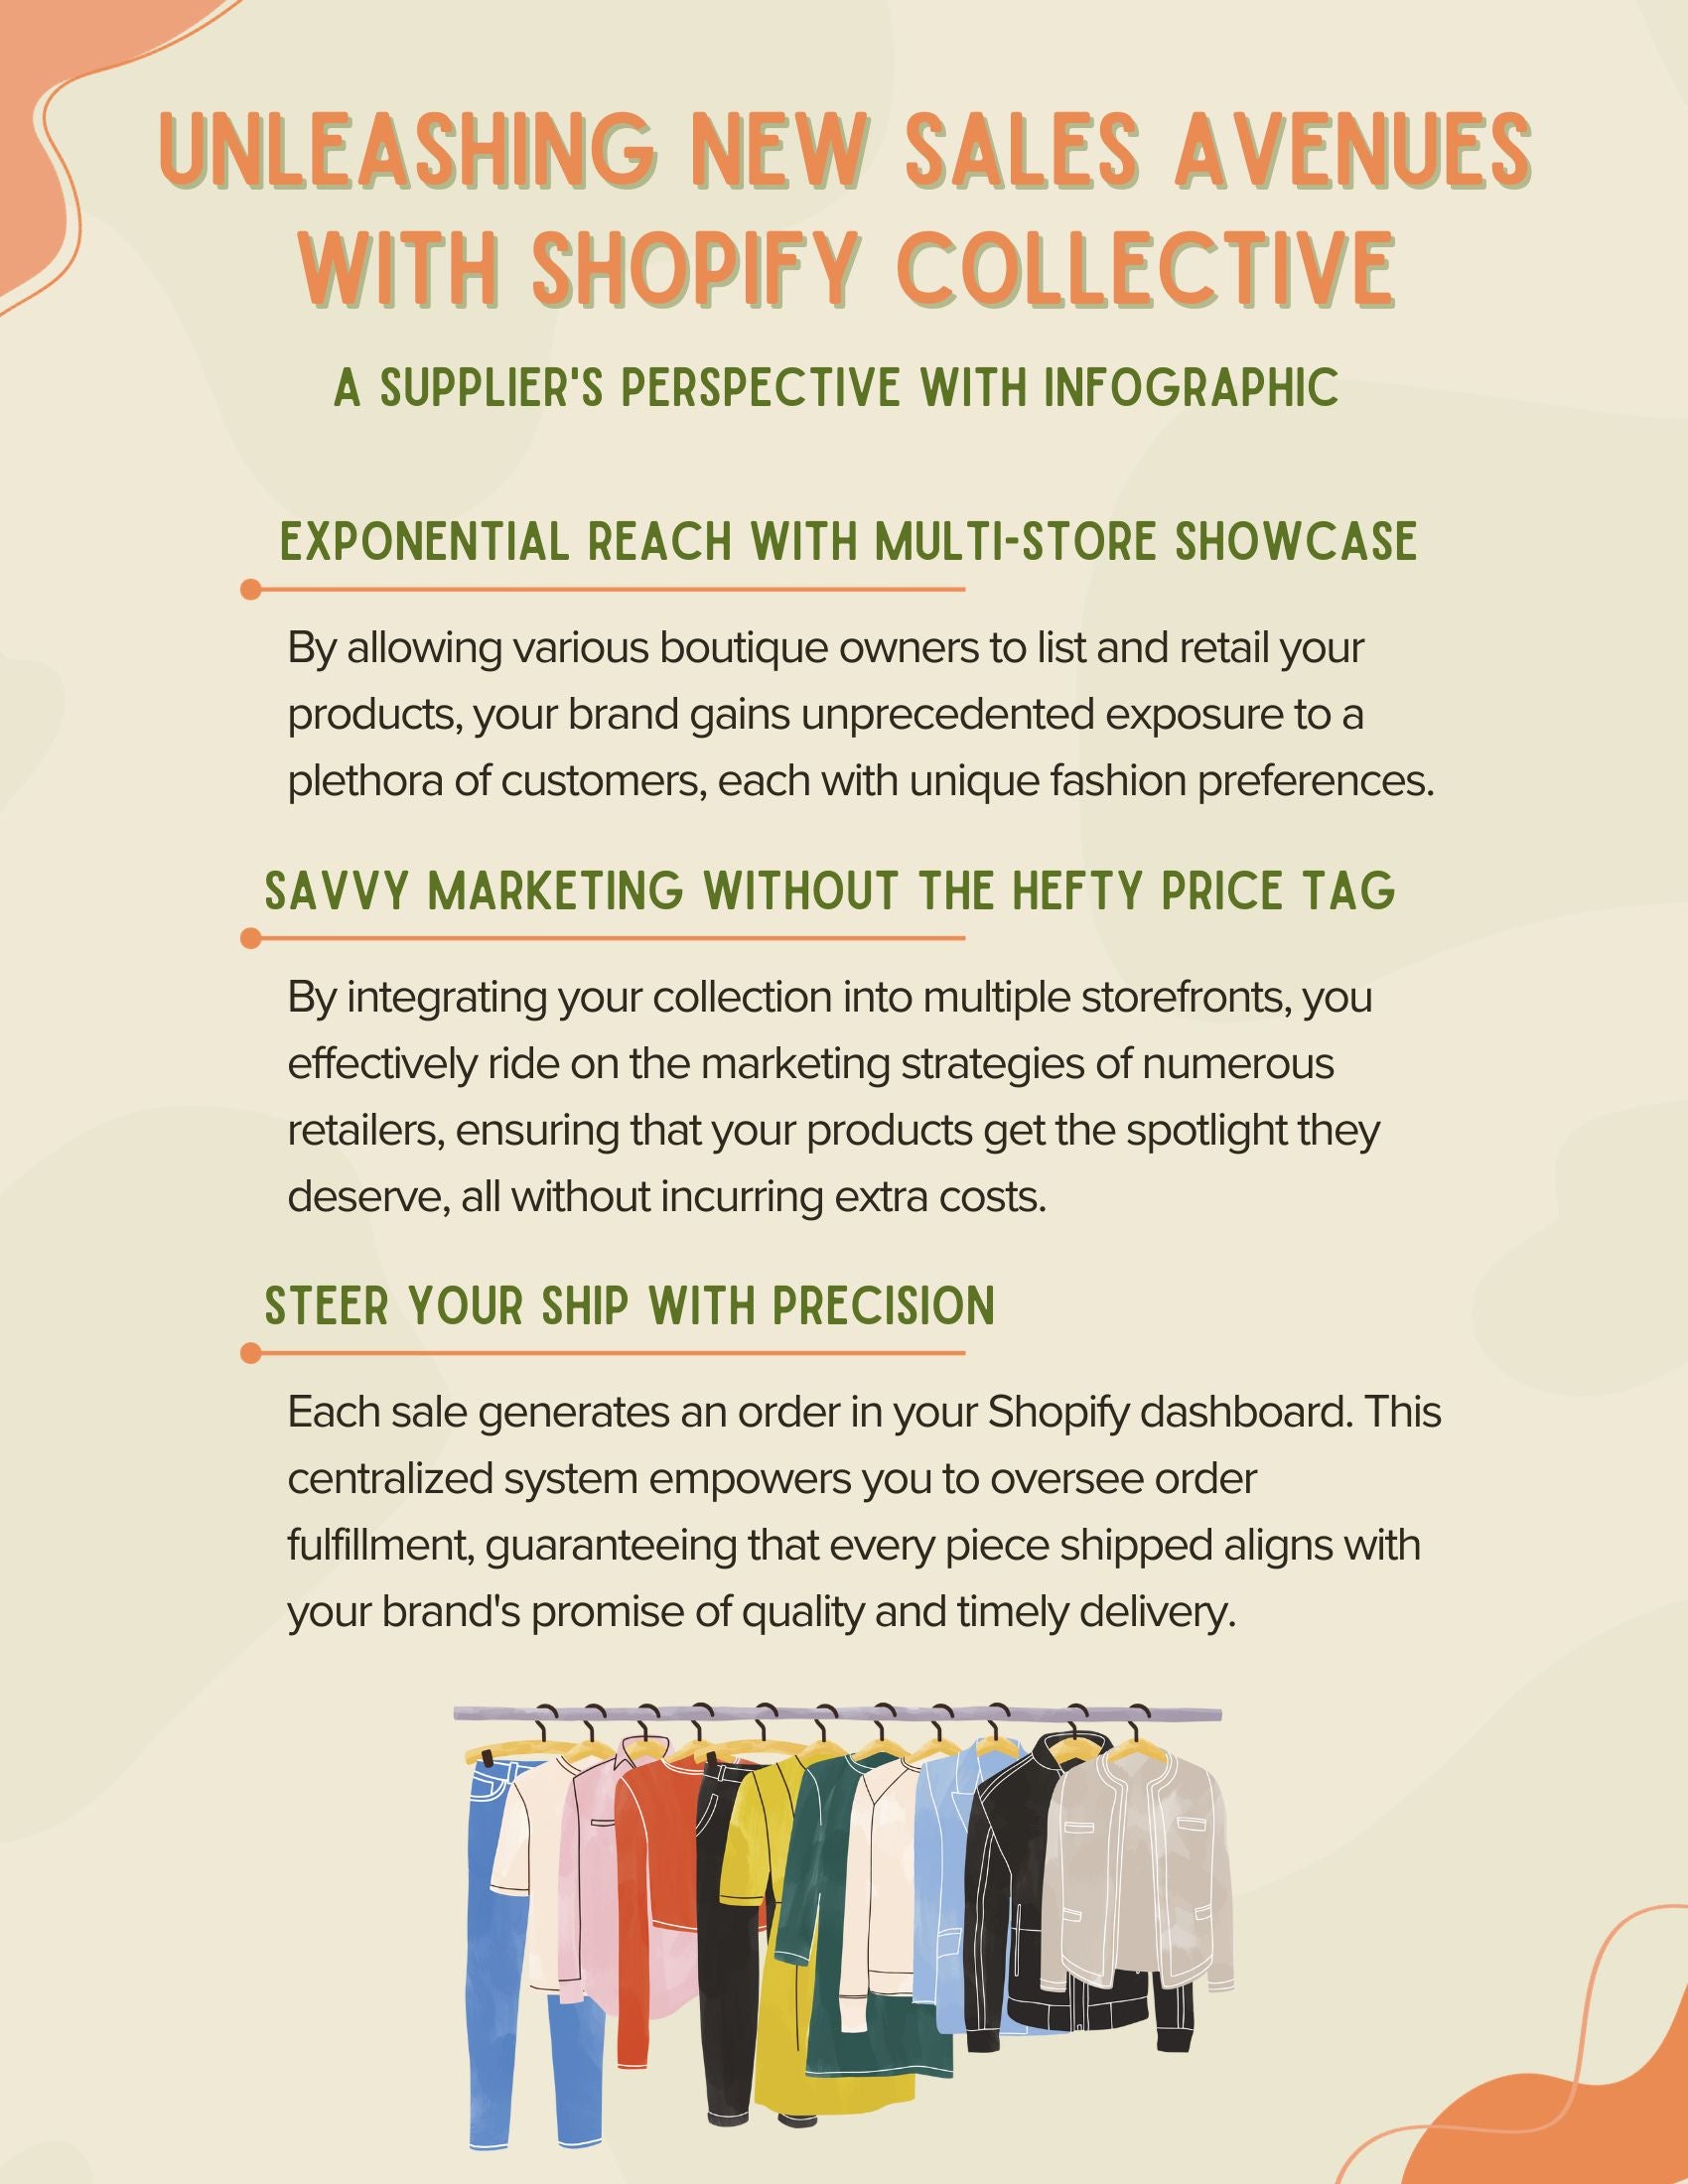 Unleashing new sales avenues with Shopify Collective